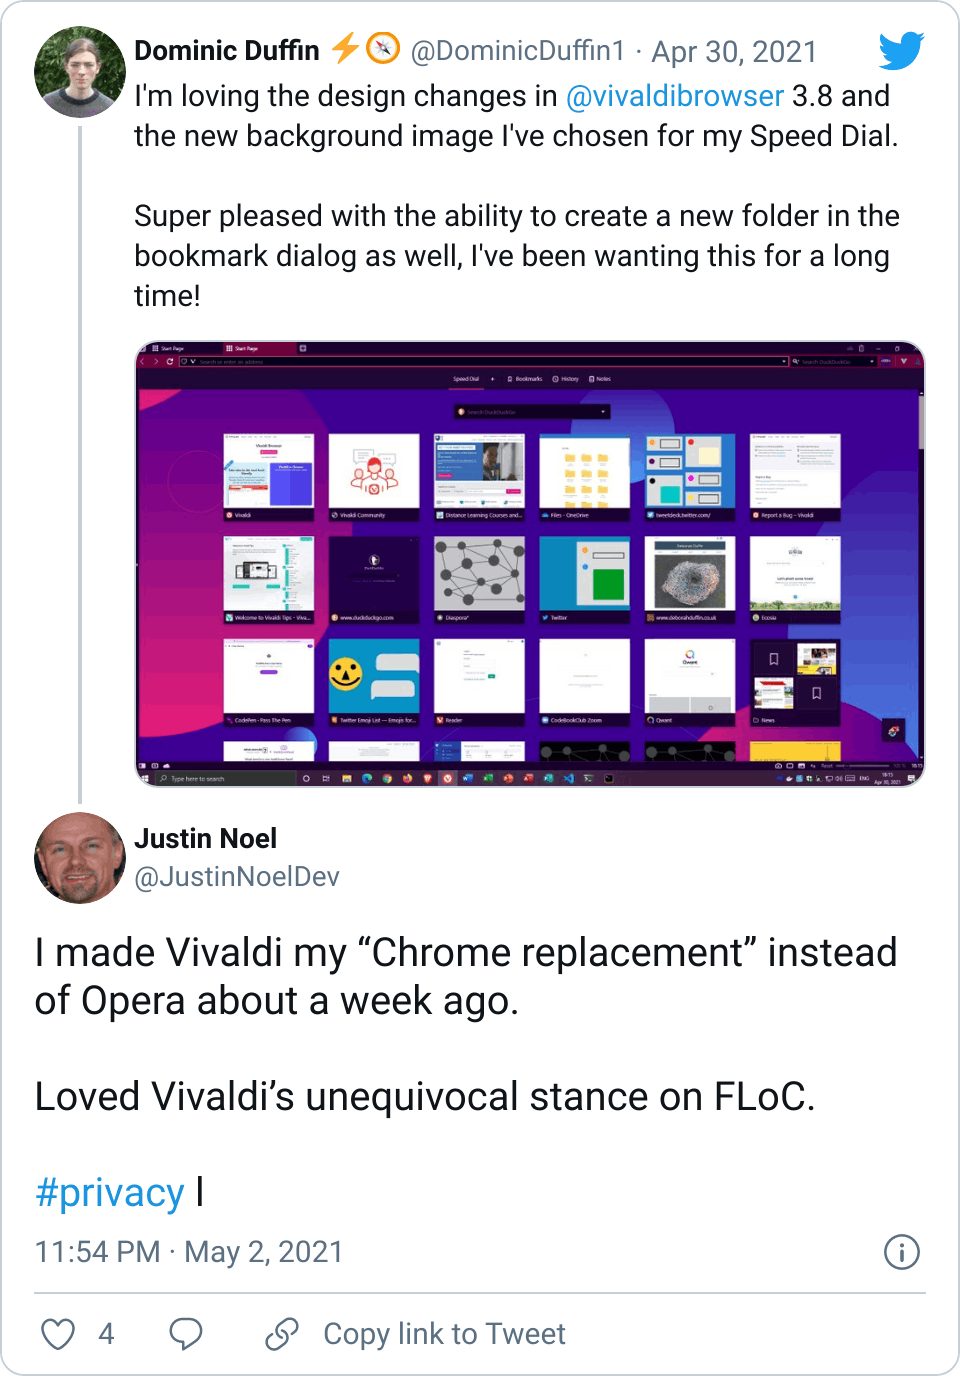 Tweet Screenshot. Dominic Duffin says, "I'm loving the design changes in @vivaldibrowser 3.8 and the new background image I've chosen for my Speed Dial.Super pleased with the ability to create a new folder in the bookmark dialog as well, I've been wanting this for a long time!". Justin Noel responds, "I made Vivaldi my “Chrome replacement” instead of Opera about a week ago.Loved Vivaldi’s unequivocal stance on FLoC. #privacy" 